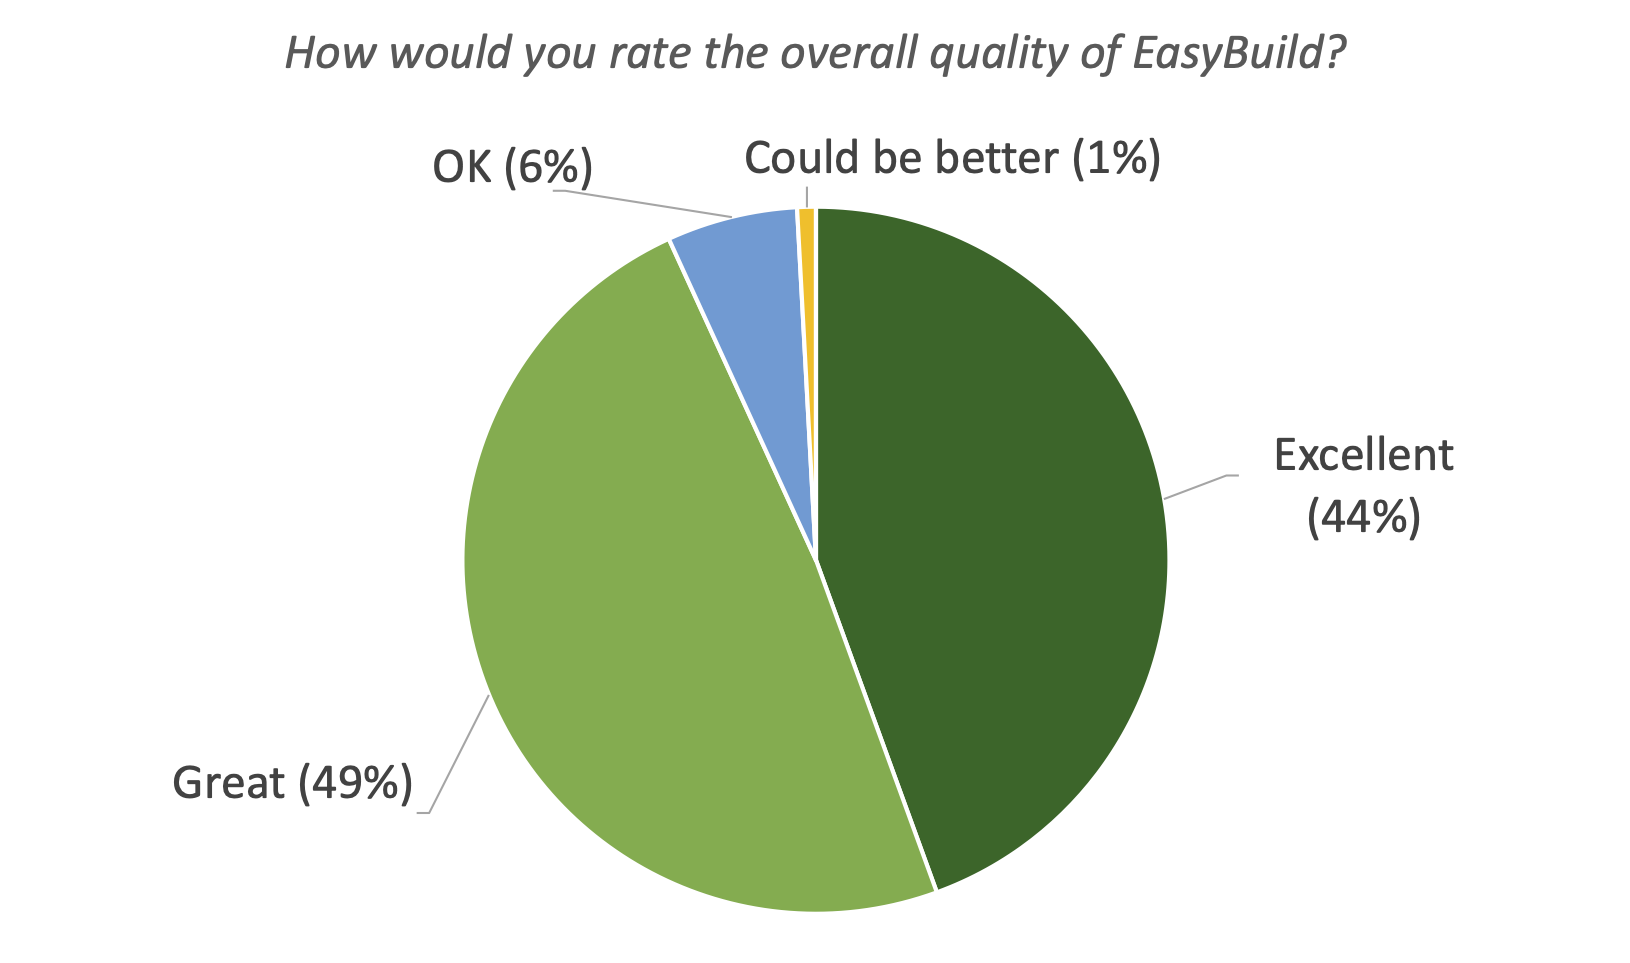 49. How would you rate the overall quality of EasyBuild?